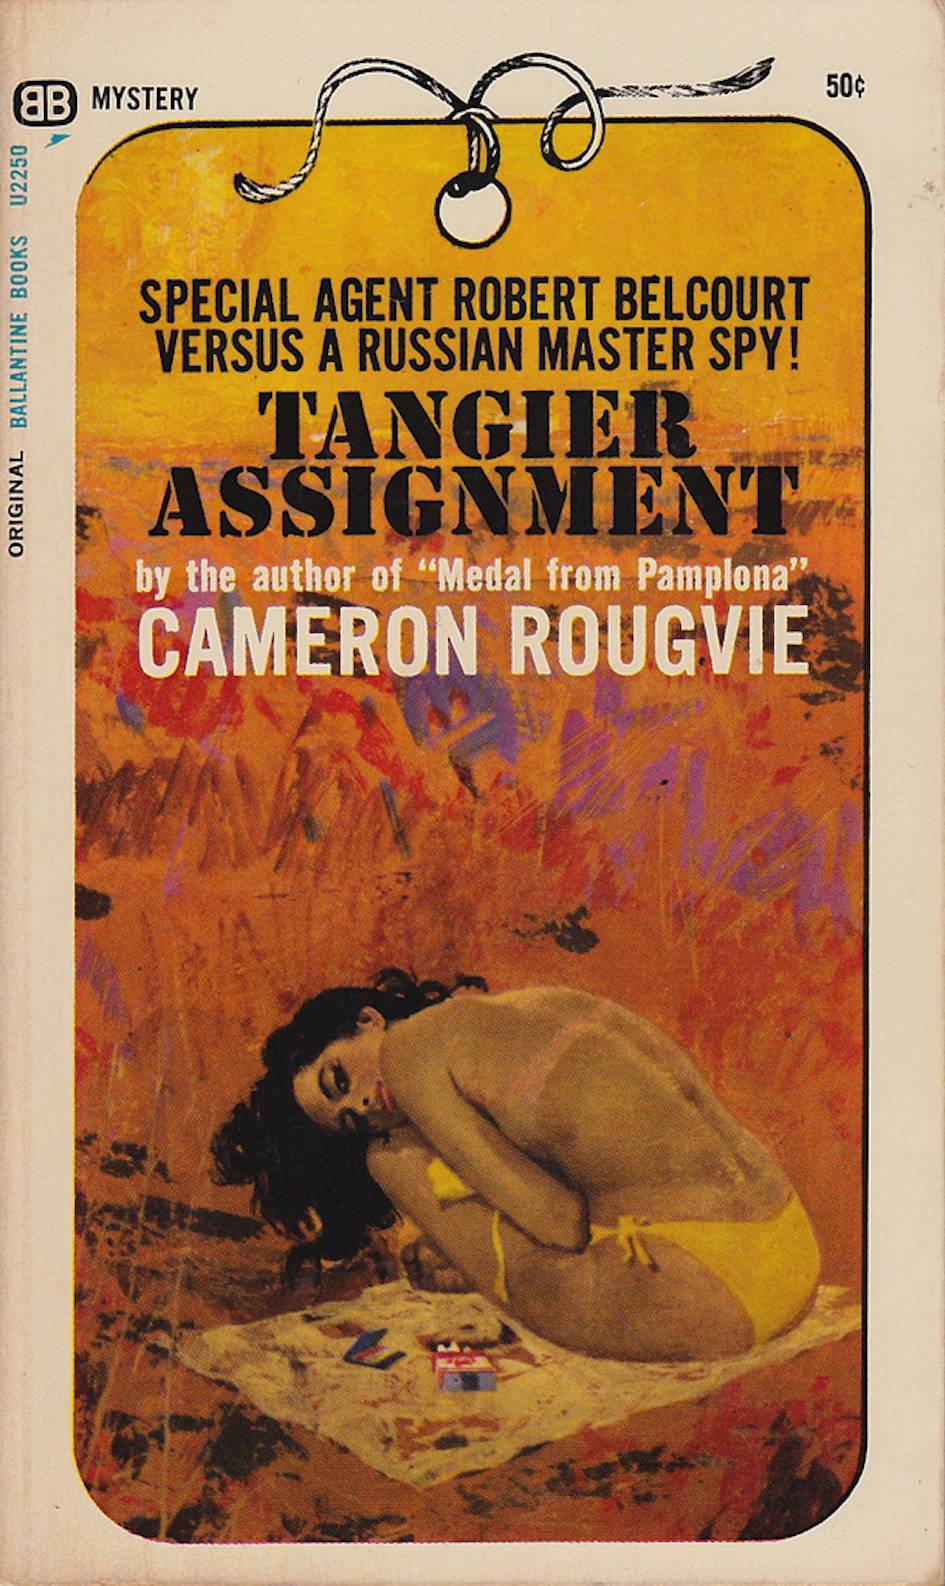 Assignment Tangier by Cameron Rougvie, the book left behind by James Earl Ray